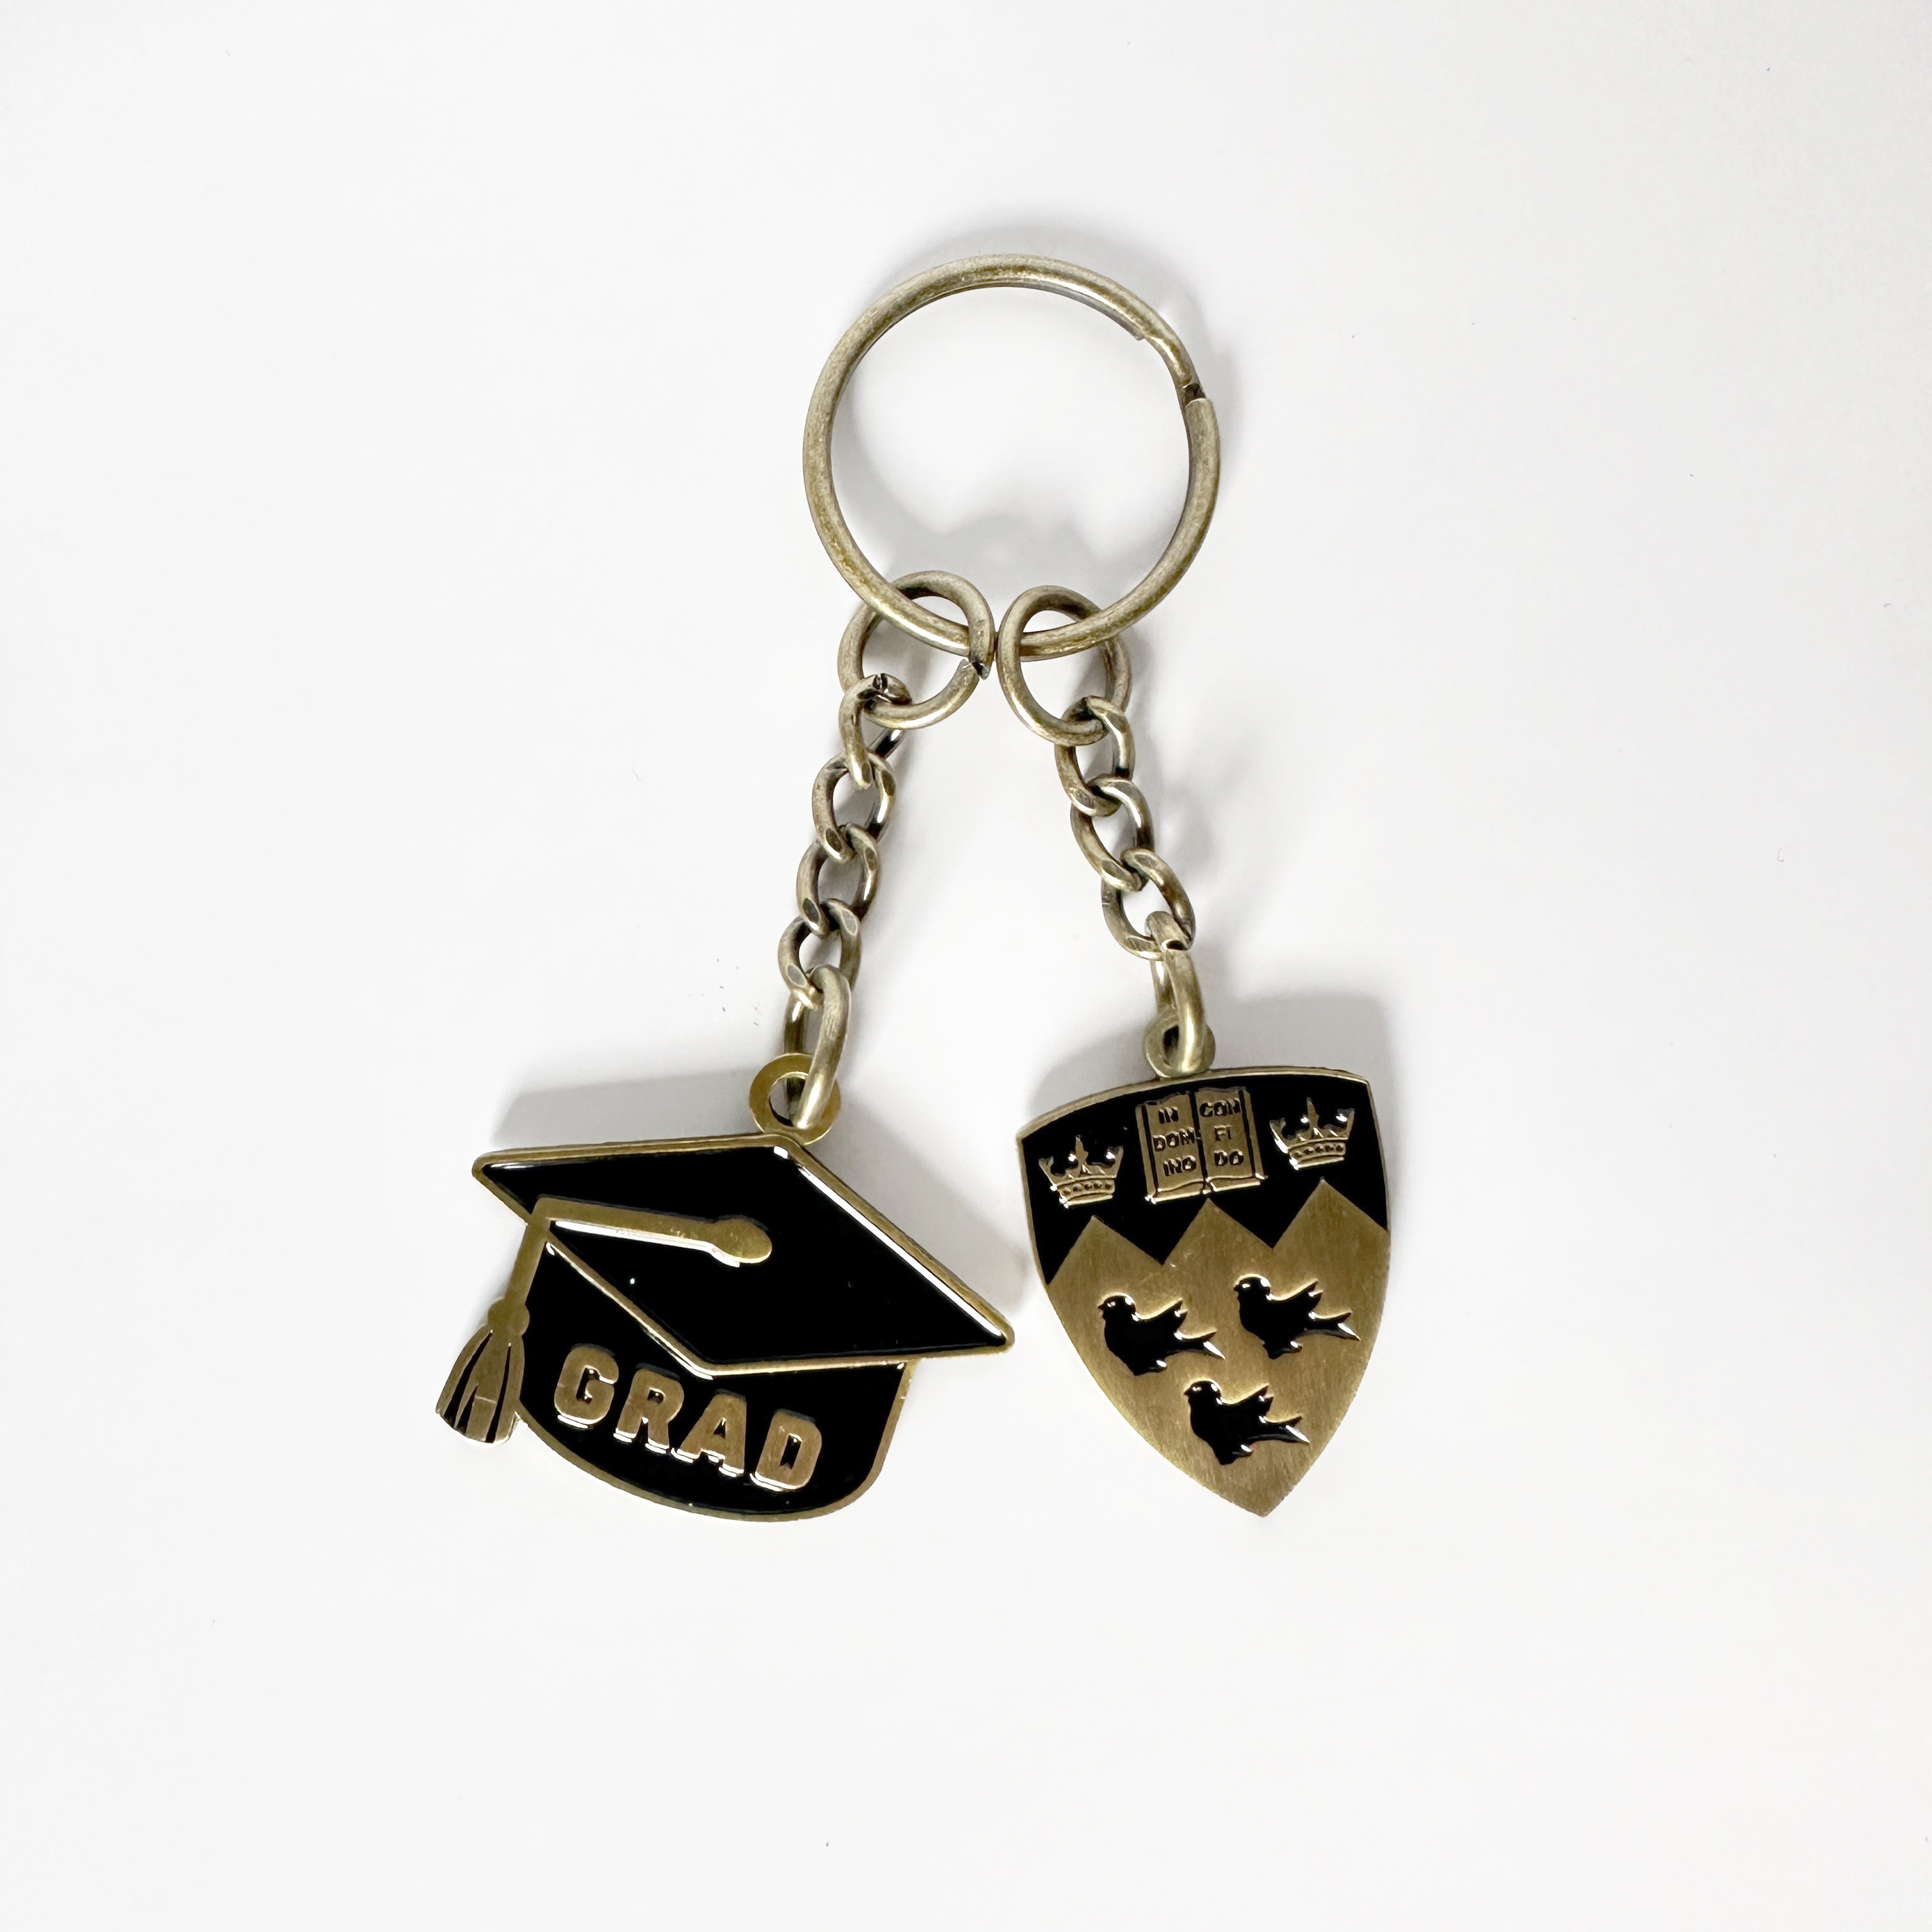 Gold finished keychain featuring a cut out grad cap and McGill crest on chain hardware